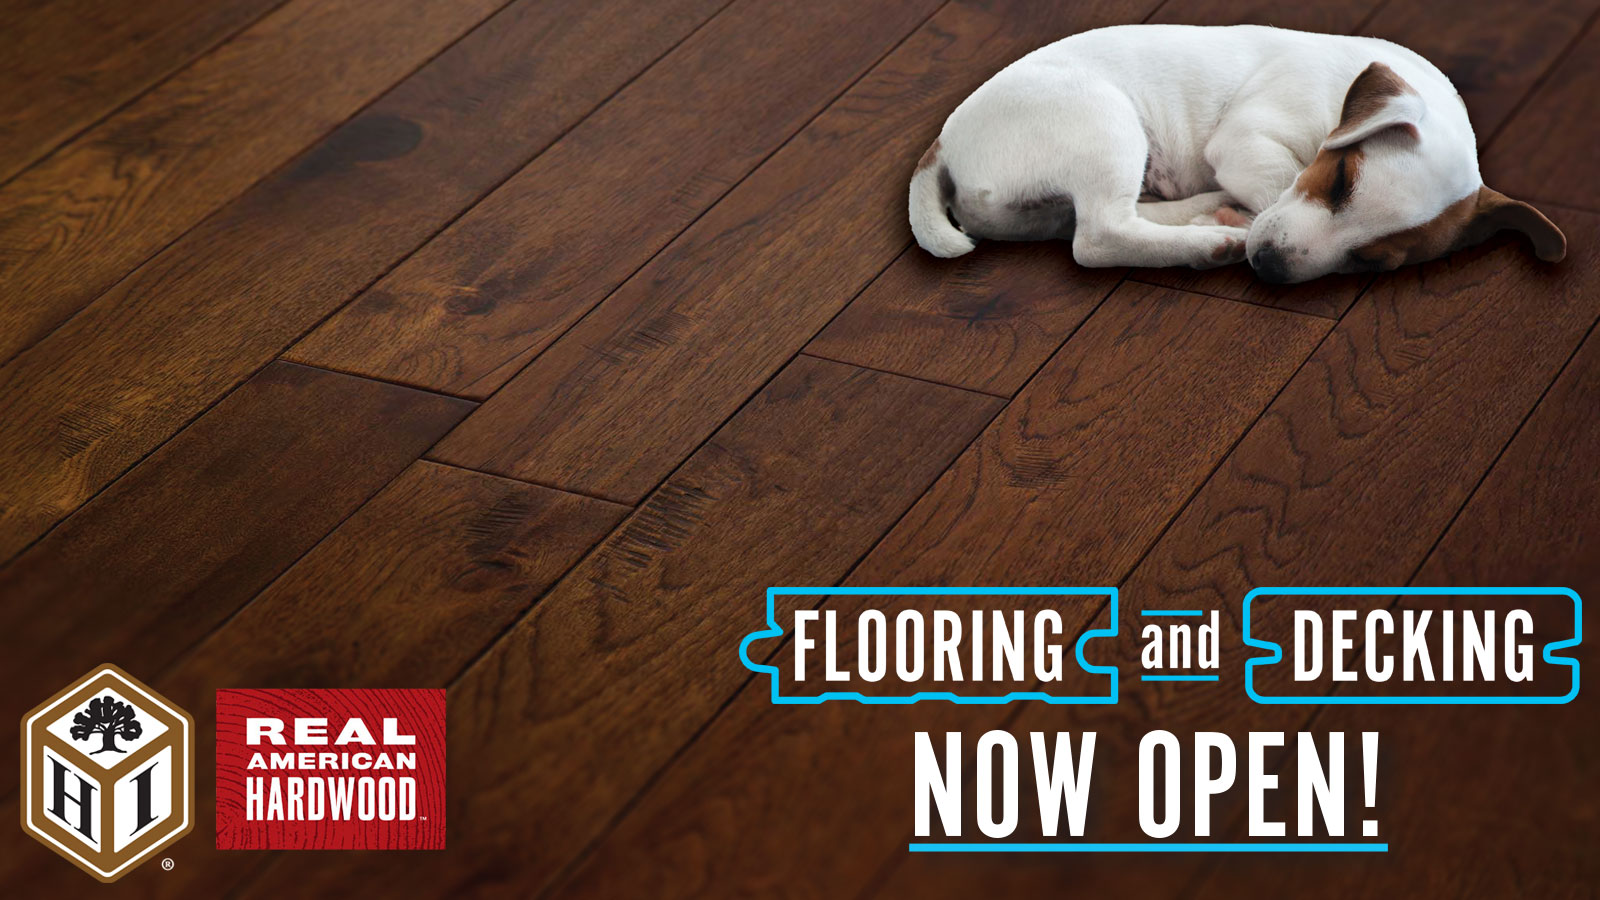 Hardwood Industries' New Flooring and Decking Location GRAND OPENING!